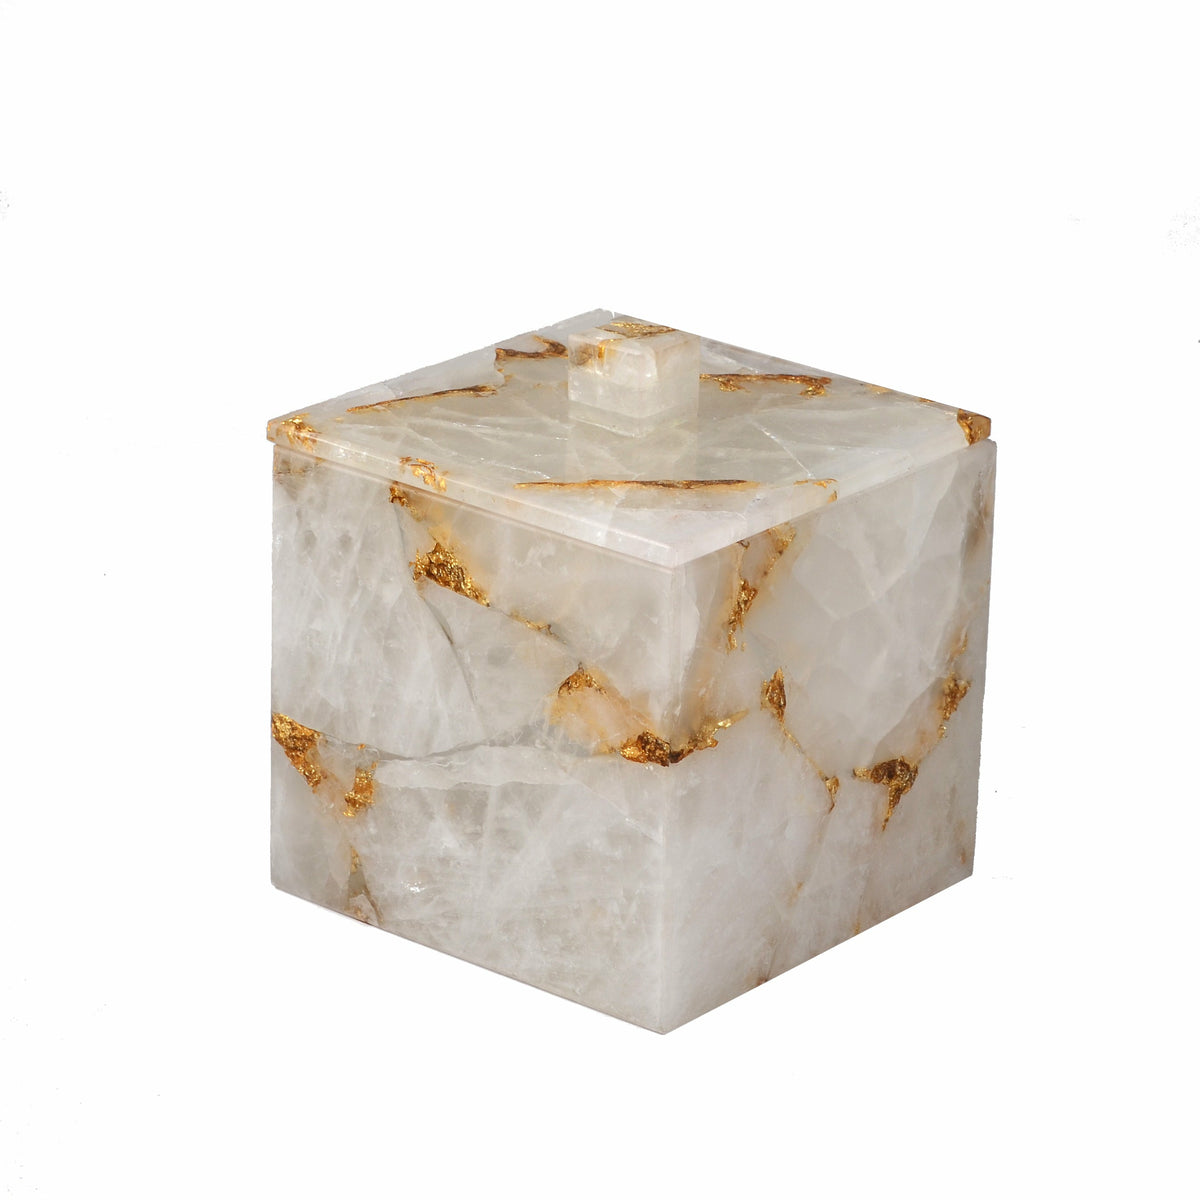 Mike and Ally Taj Premium Gemstone Bath Accessories Square Container Rock Crystal w/ Gold Foil